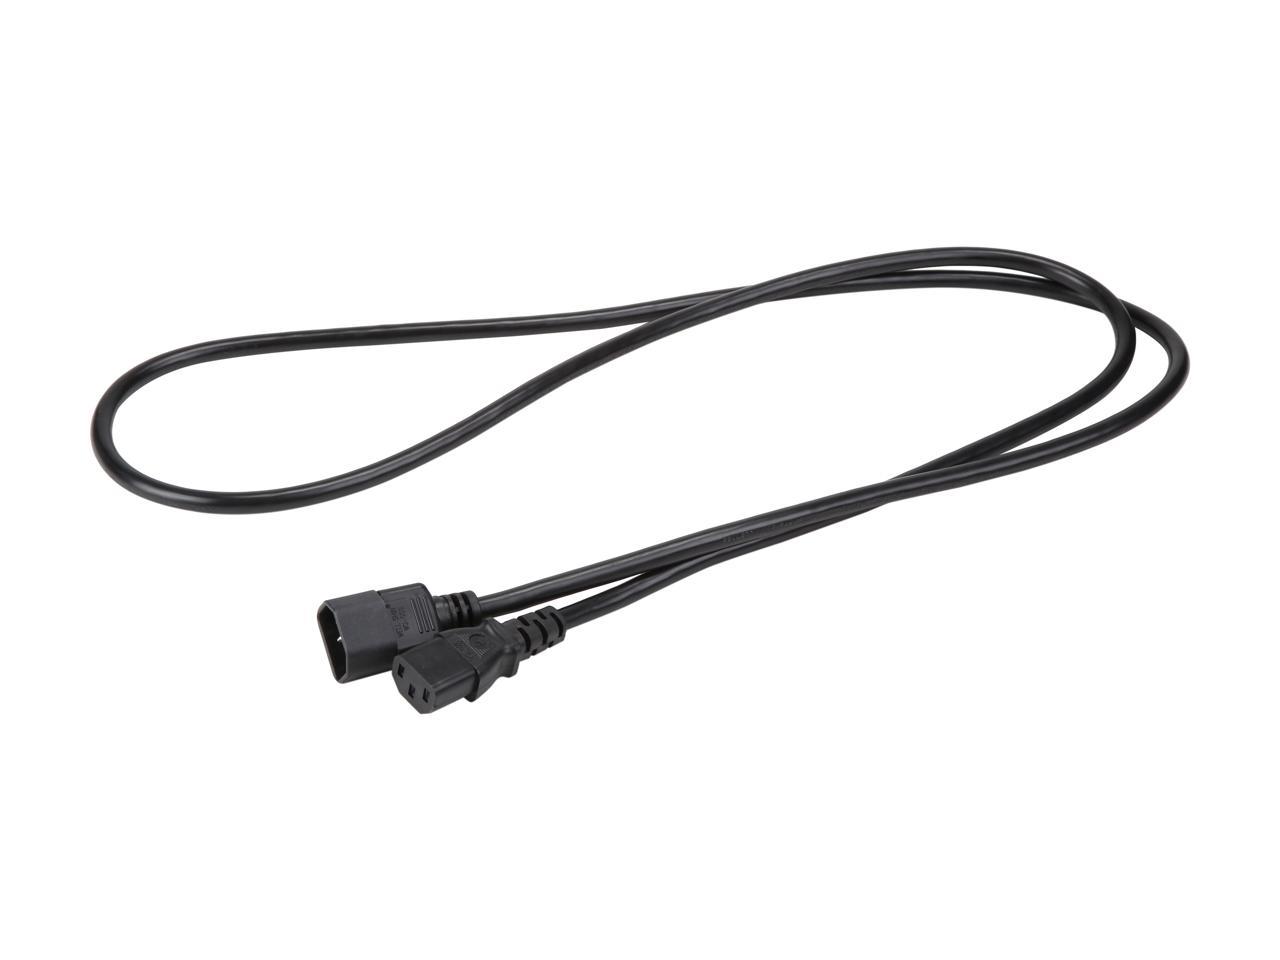 C2G 29967 16 AWG 250 Volt Computer Power Extension Cord - C14 to C13, TAA Compliant, Black (6 Feet, 1.82 Meters)